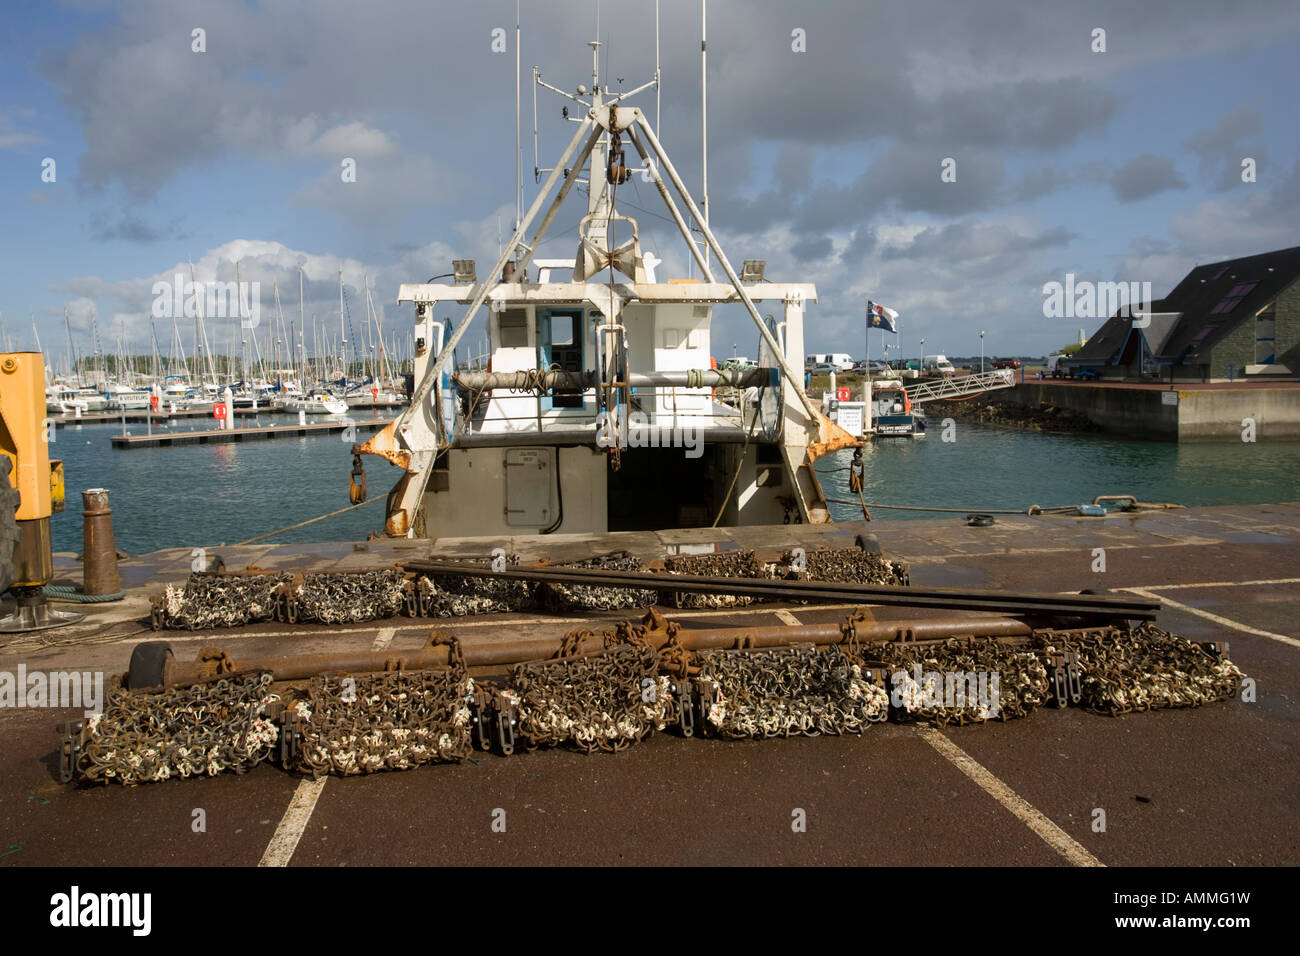 Scallop dredging nets with fishing trawlers Quineville harbour Normandy France Stock Photo